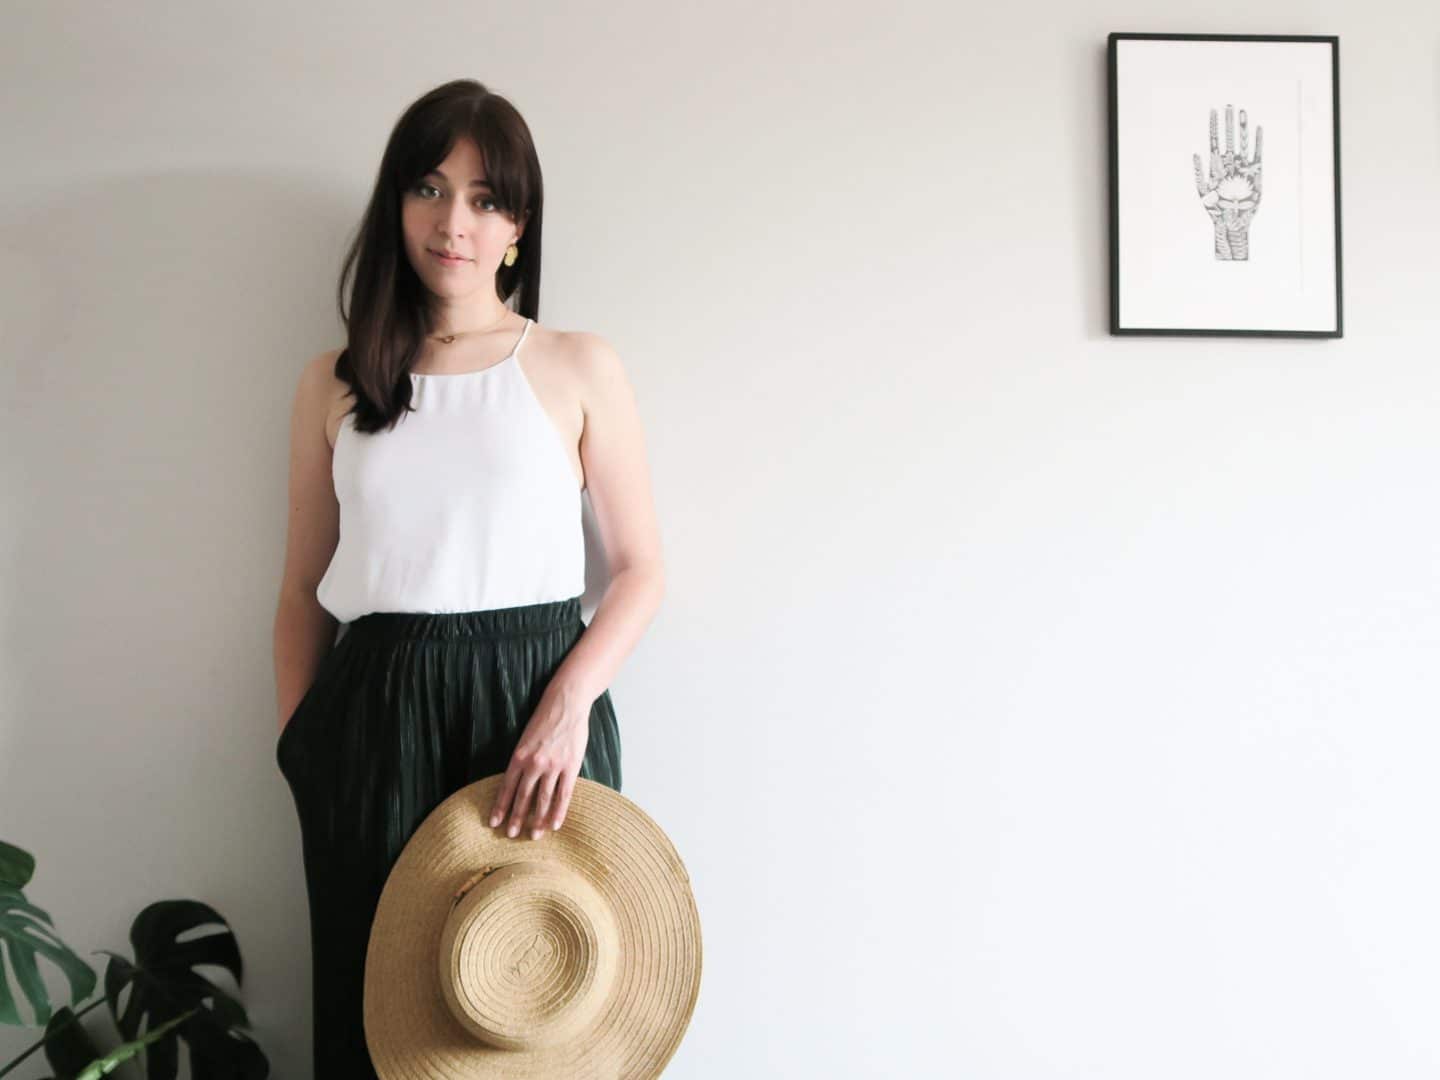 Besma in a white strappy top, green wide-leg trousers holding a straw hat